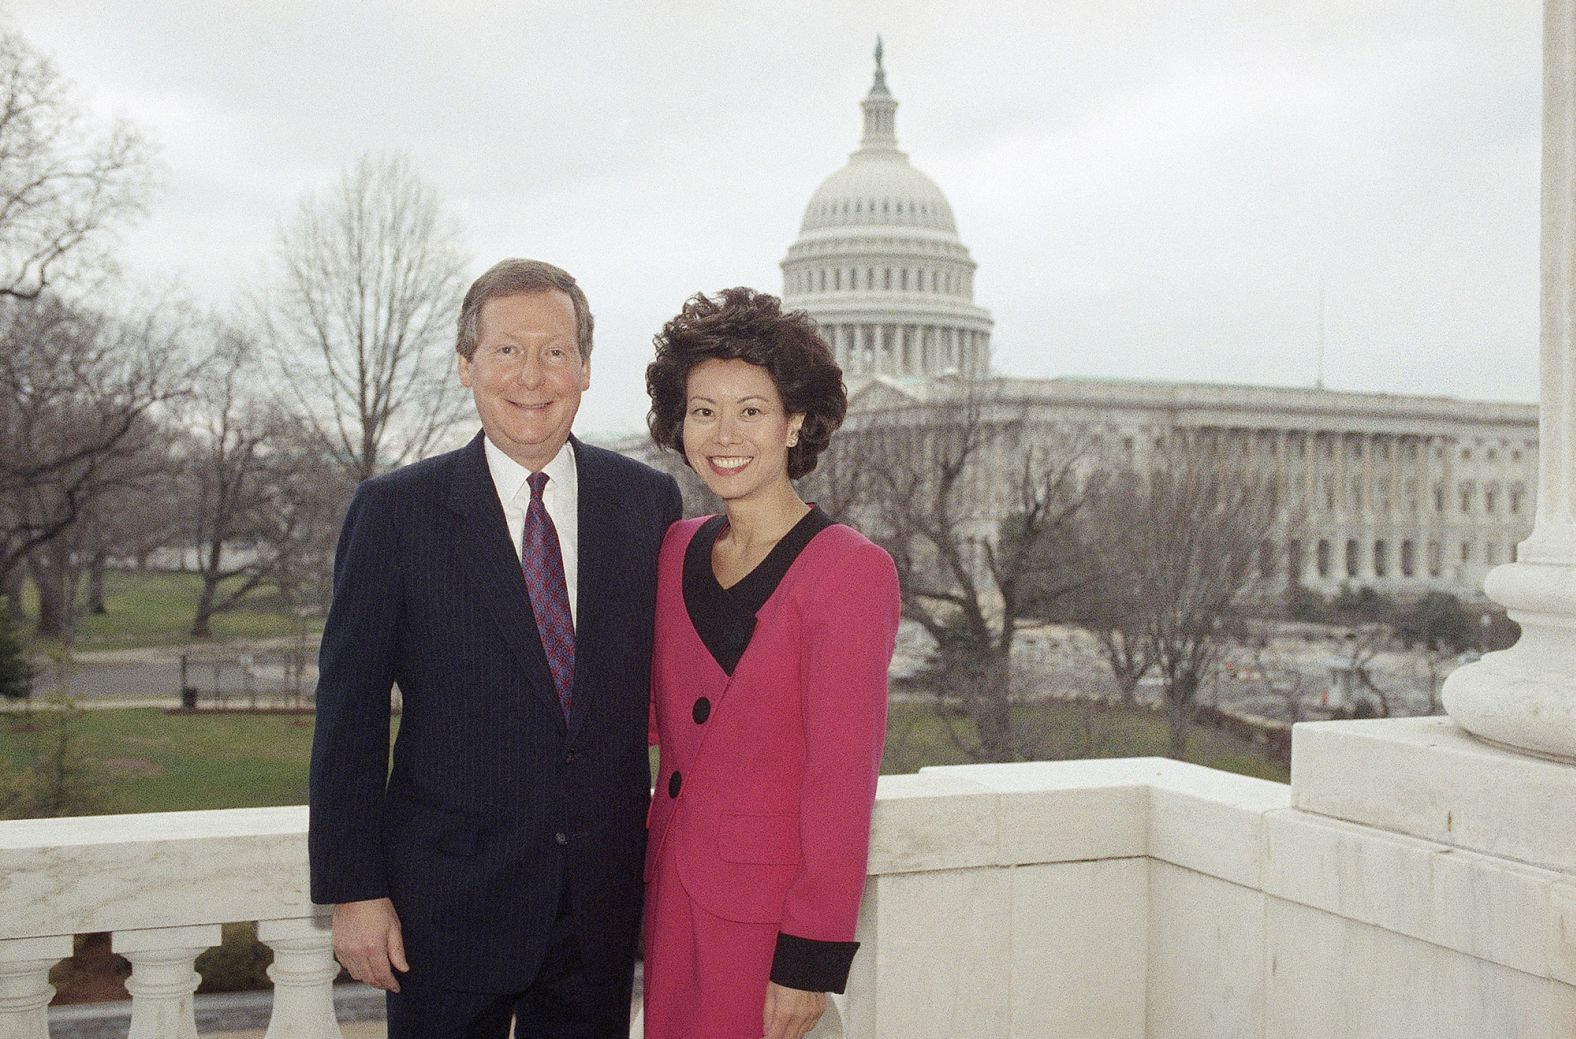 McConnell stands with fiancée Elaine Chao just before they were married in the US Capitol chapel in February 1993. The wedding was a private ceremony attended by their families.  Chao, who at the time was president of the United Way of America, would later serve as secretary of the Department of Labor under President George W. Bush, deputy secretary of the Department of Transportation under President George H.W. Bush, and secretary of the Department of Transportation under President Donald Trump.